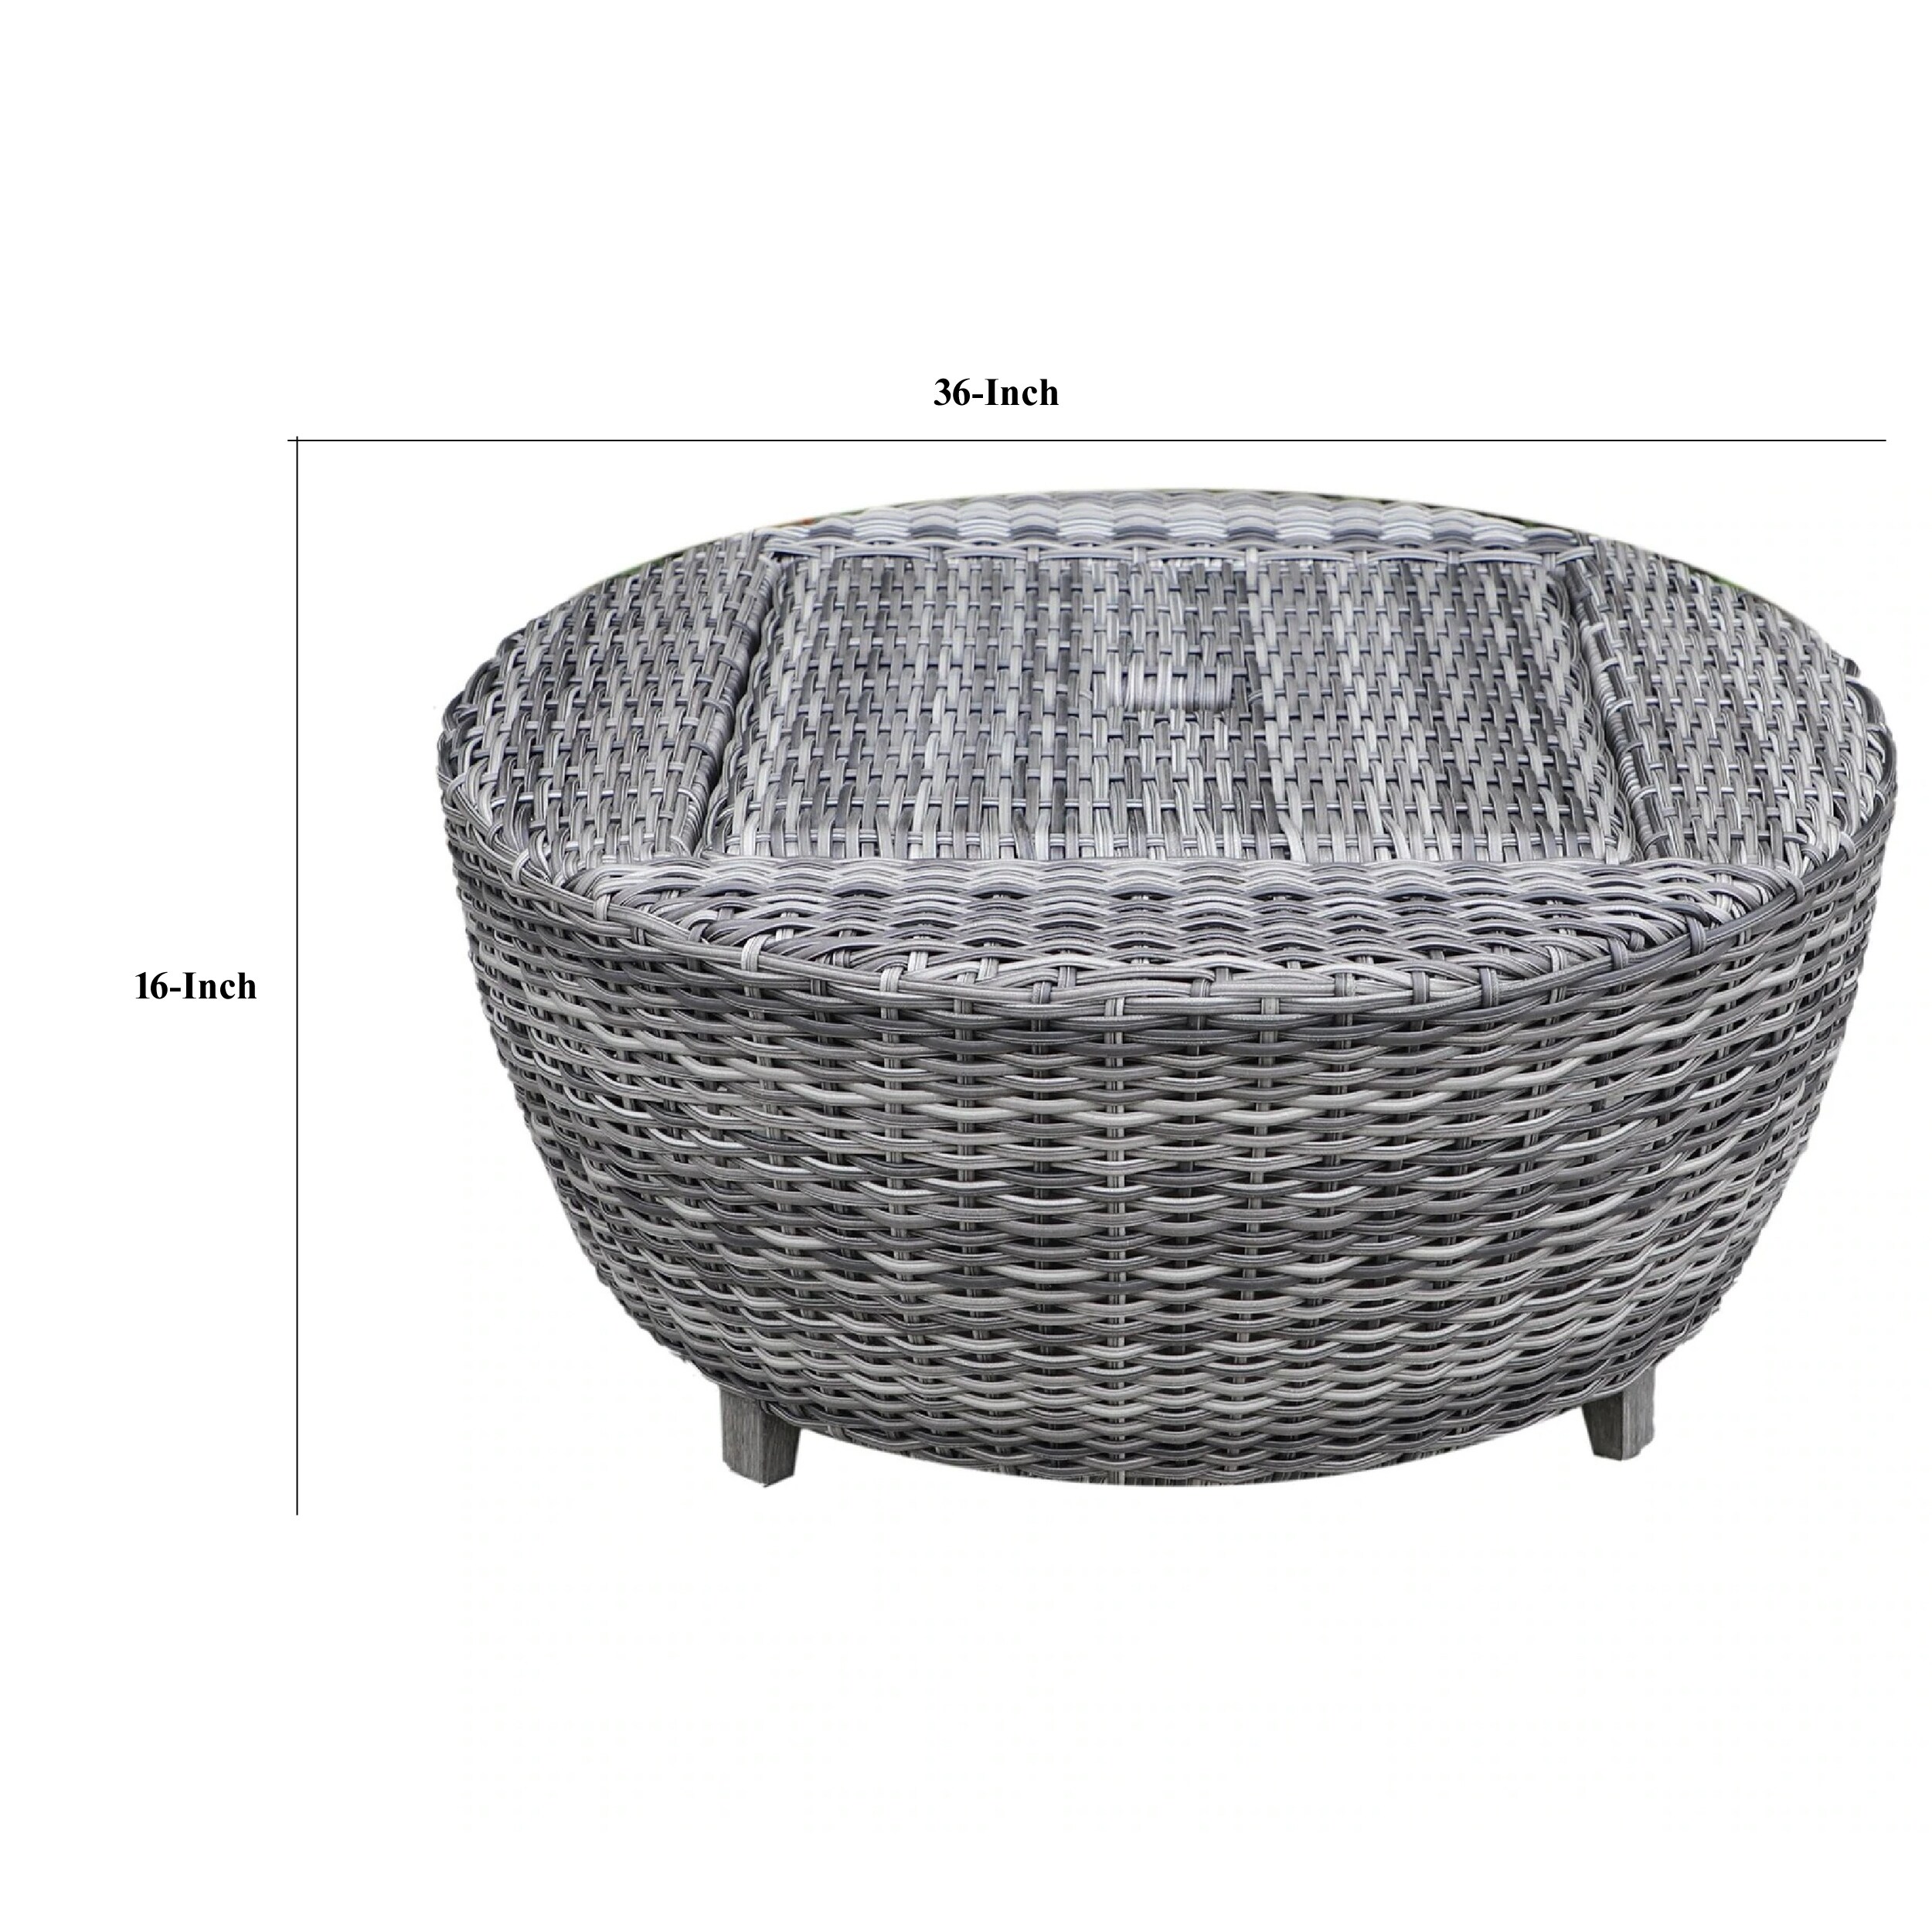 36 Inch Anders Round Outdoor Coffee Table, Cooler with Woven Wicker, Gray